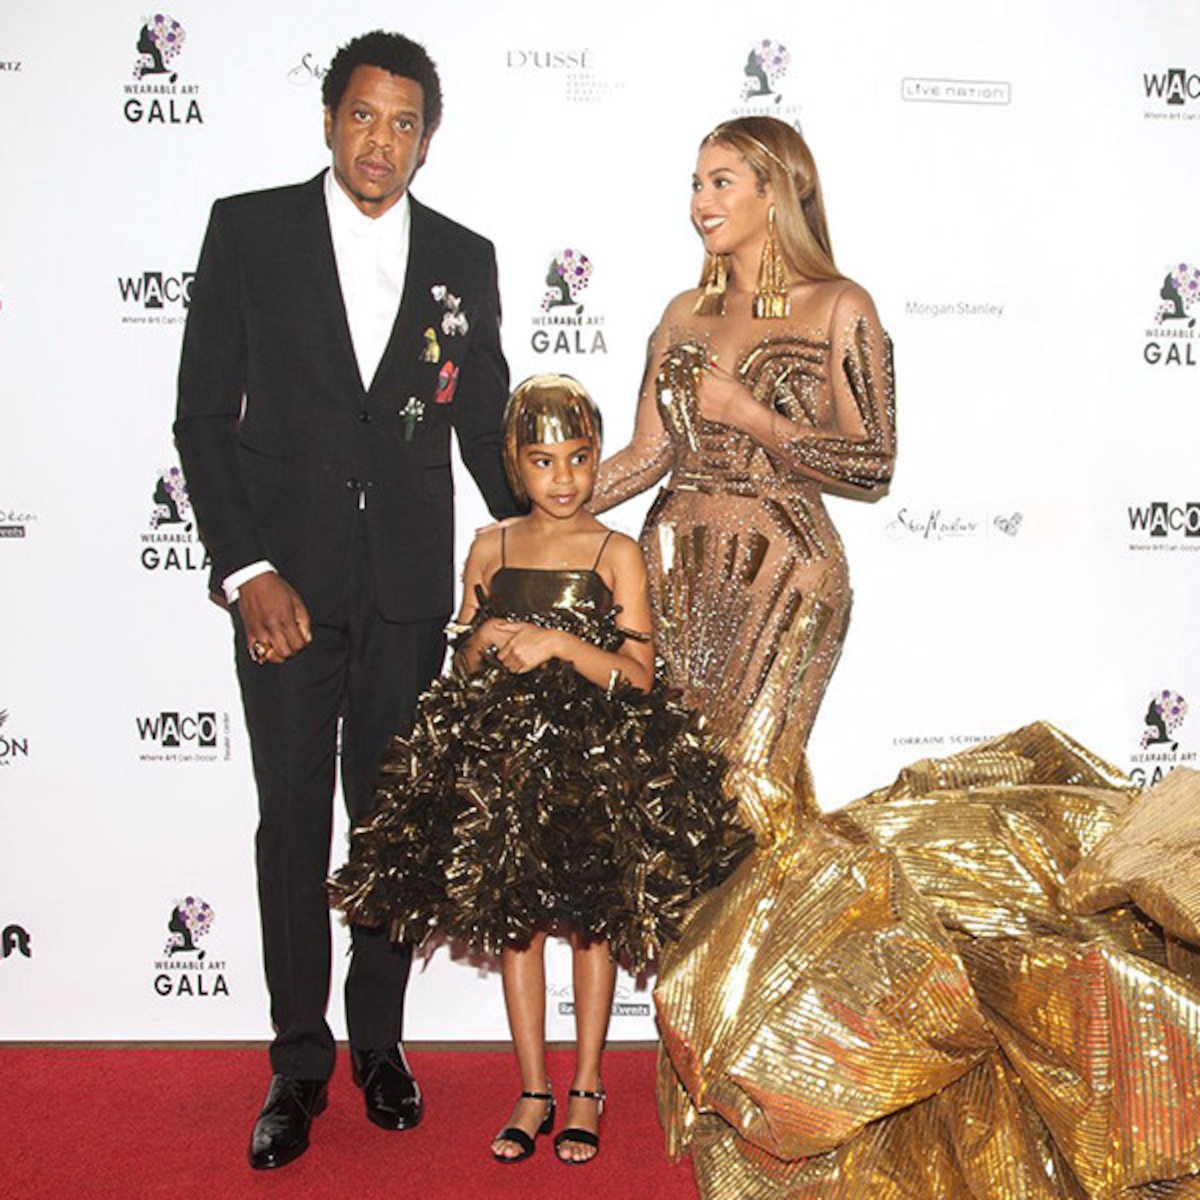 Meet the Stylist Beyoncé Hired for Blue Ivy - E! Online